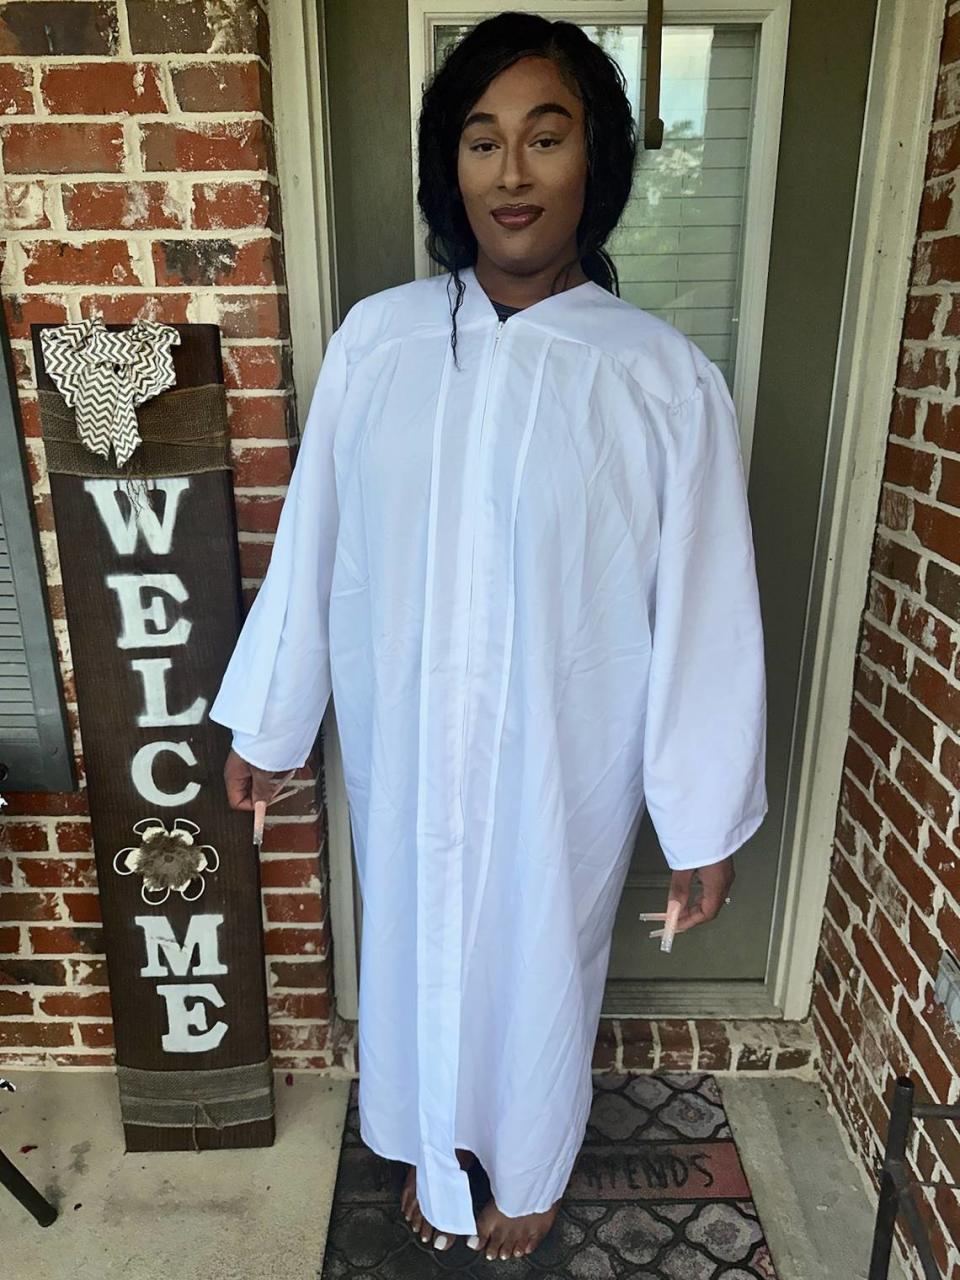 L.B., a transgender teen, skipped her high school graduation in Mississippi after the School District told her she could not wear a dress or heels to the ceremony.